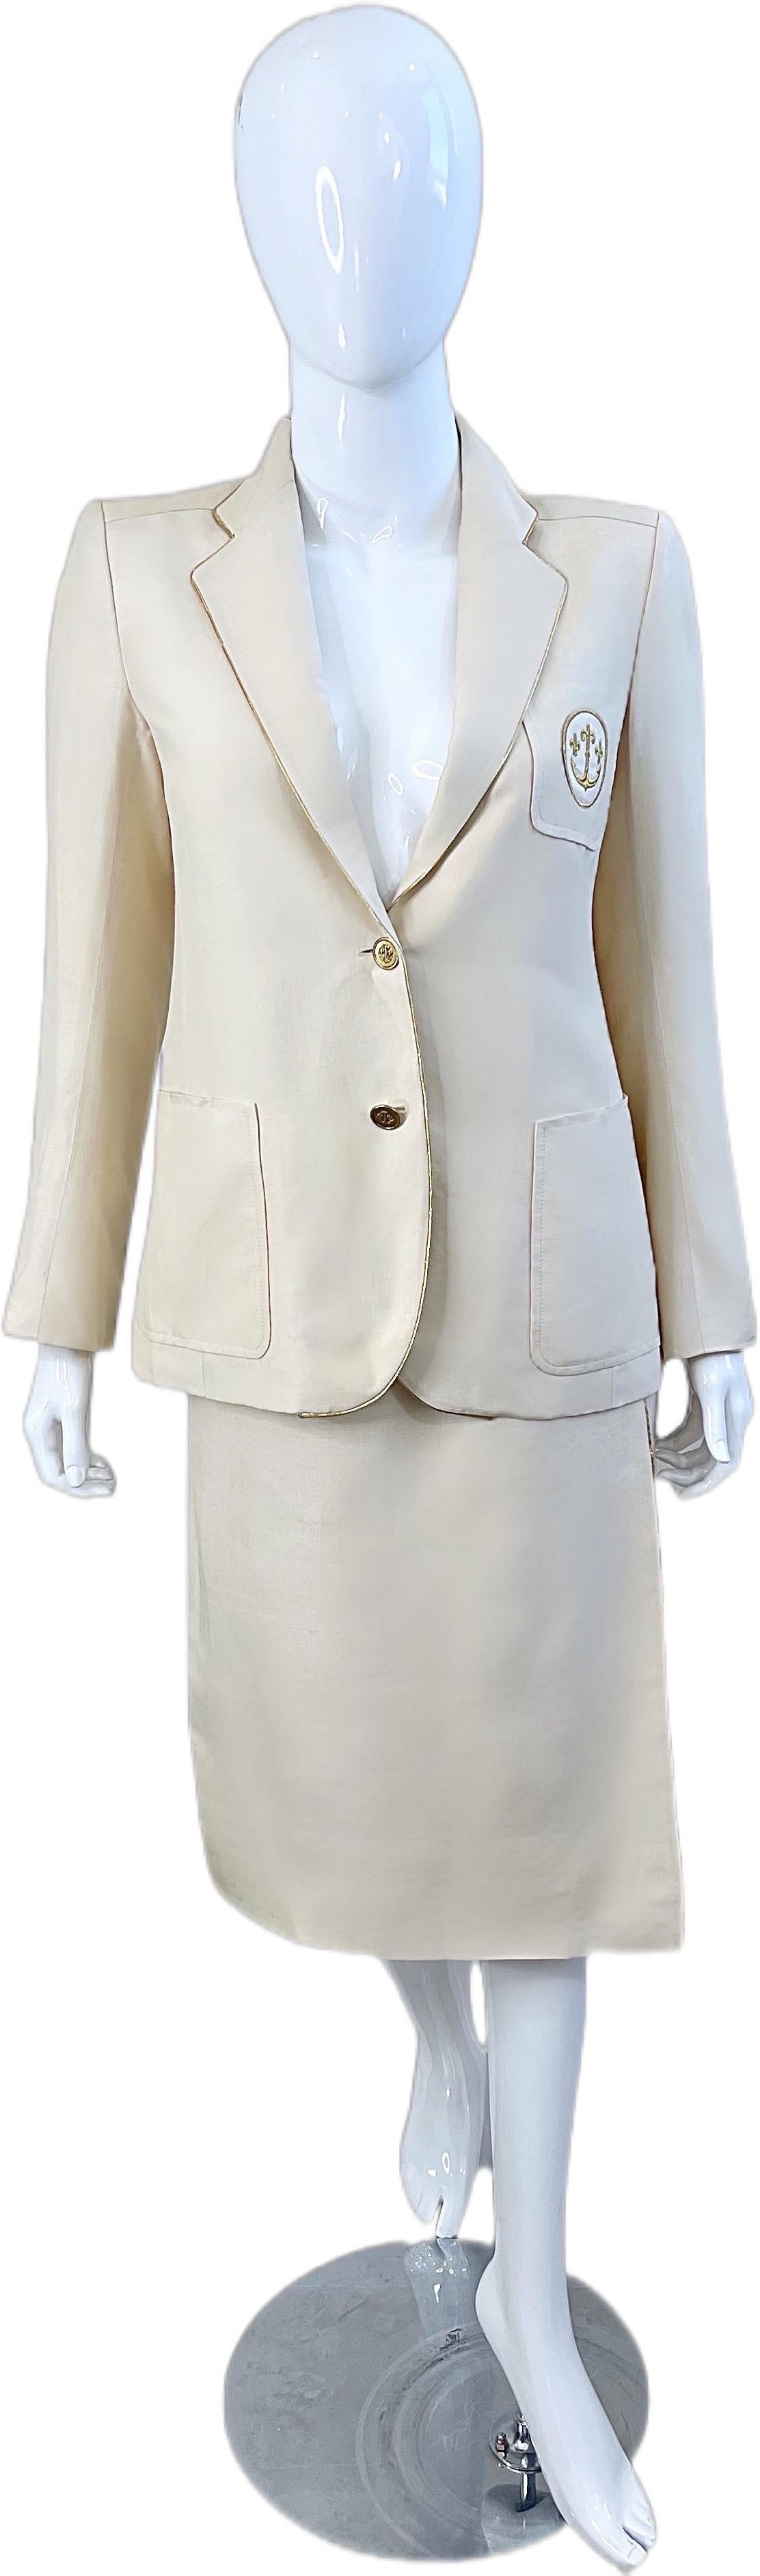 Ted Lapidus Haute Couture 1970s Nautical Ivory Anchor Vintage Silk Skirt Suit For Sale 4